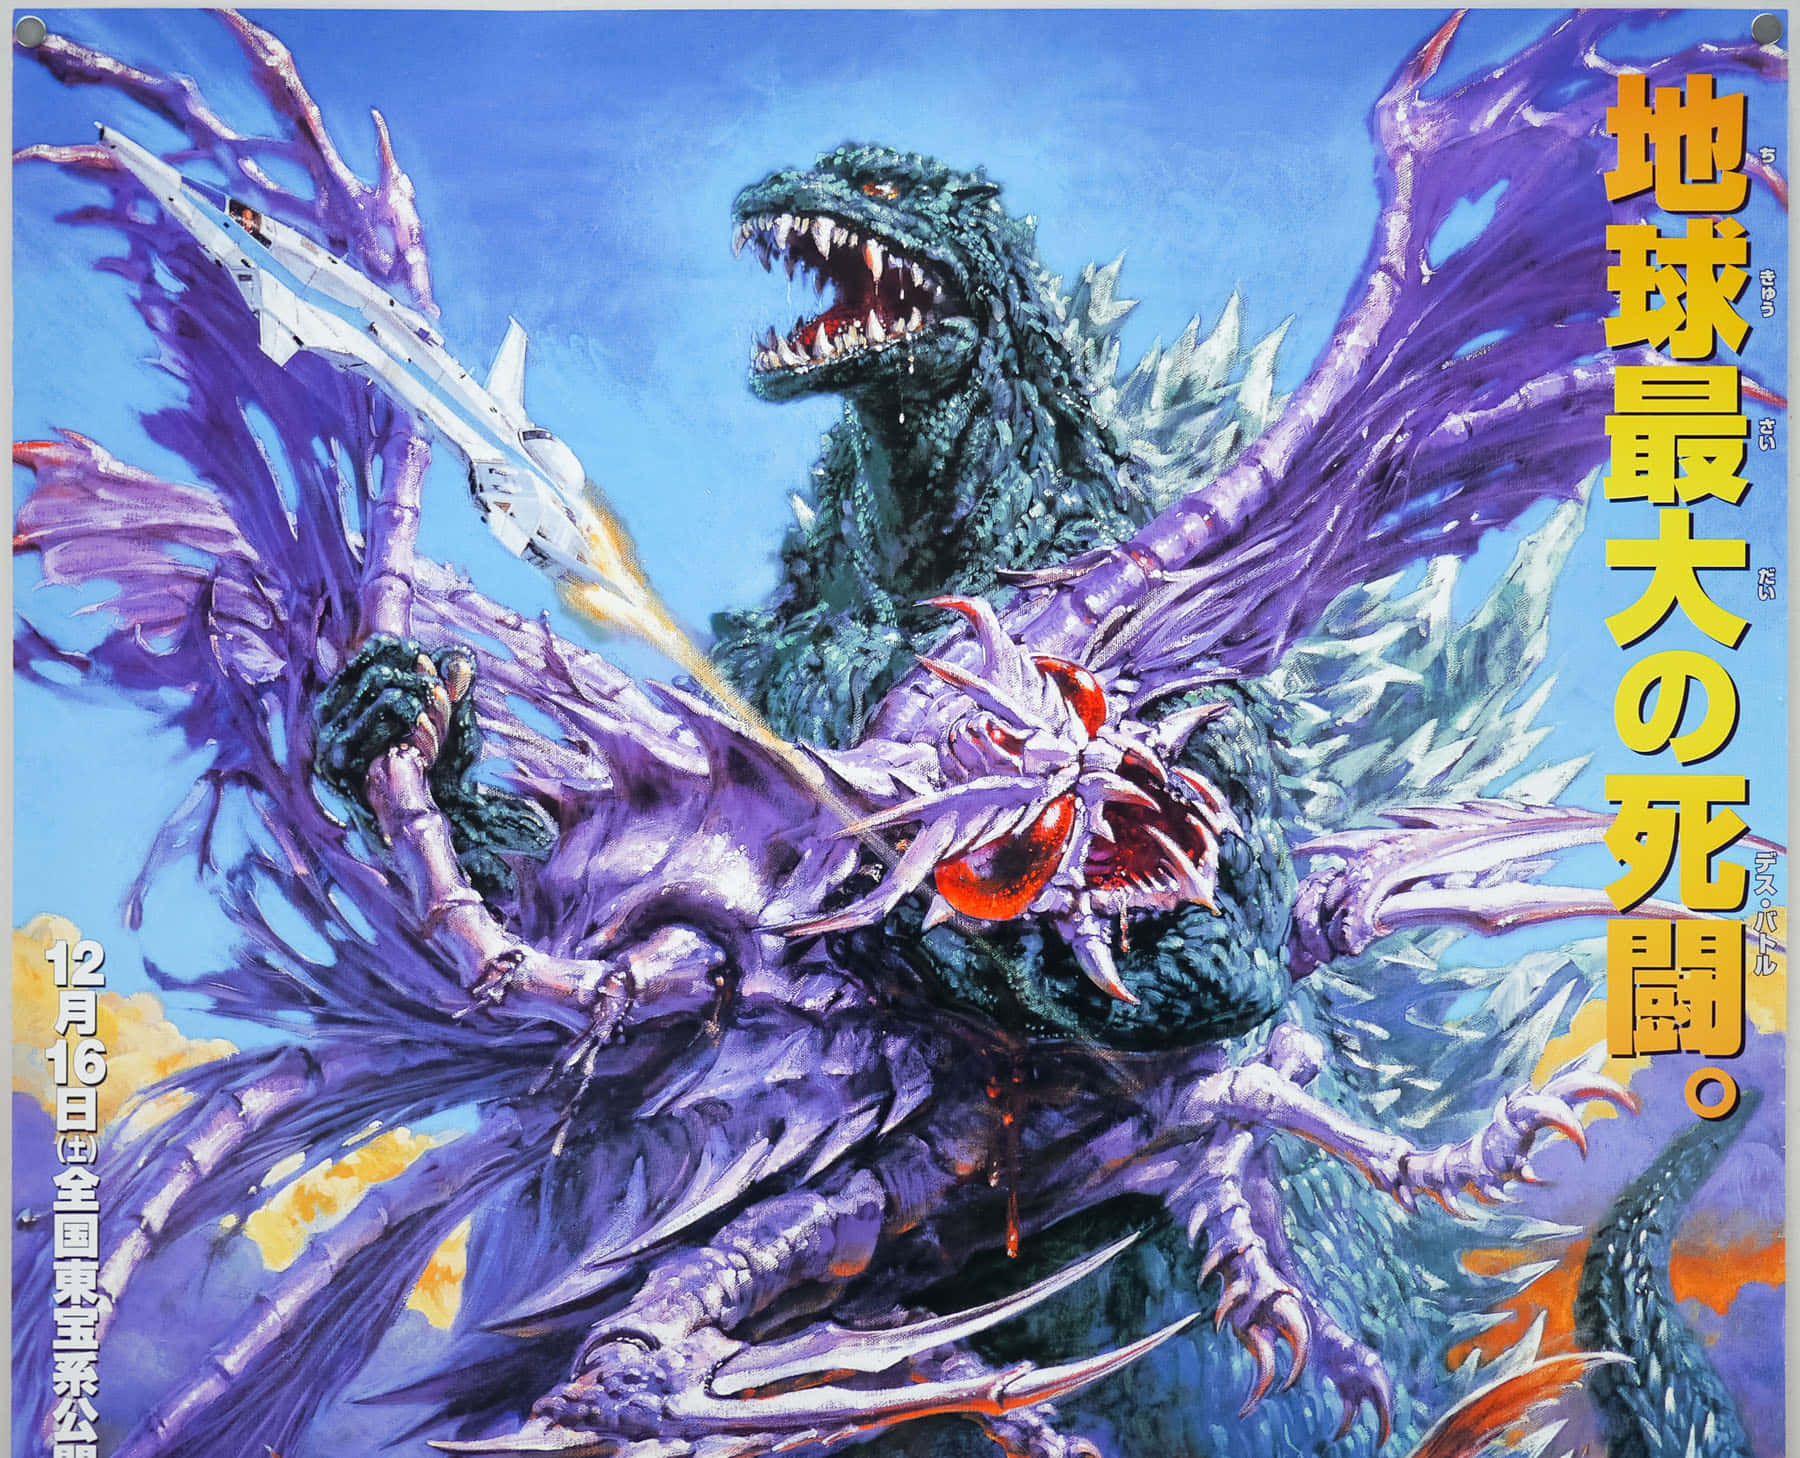 Godzilla locked in an epic battle with Megaguirus Wallpaper